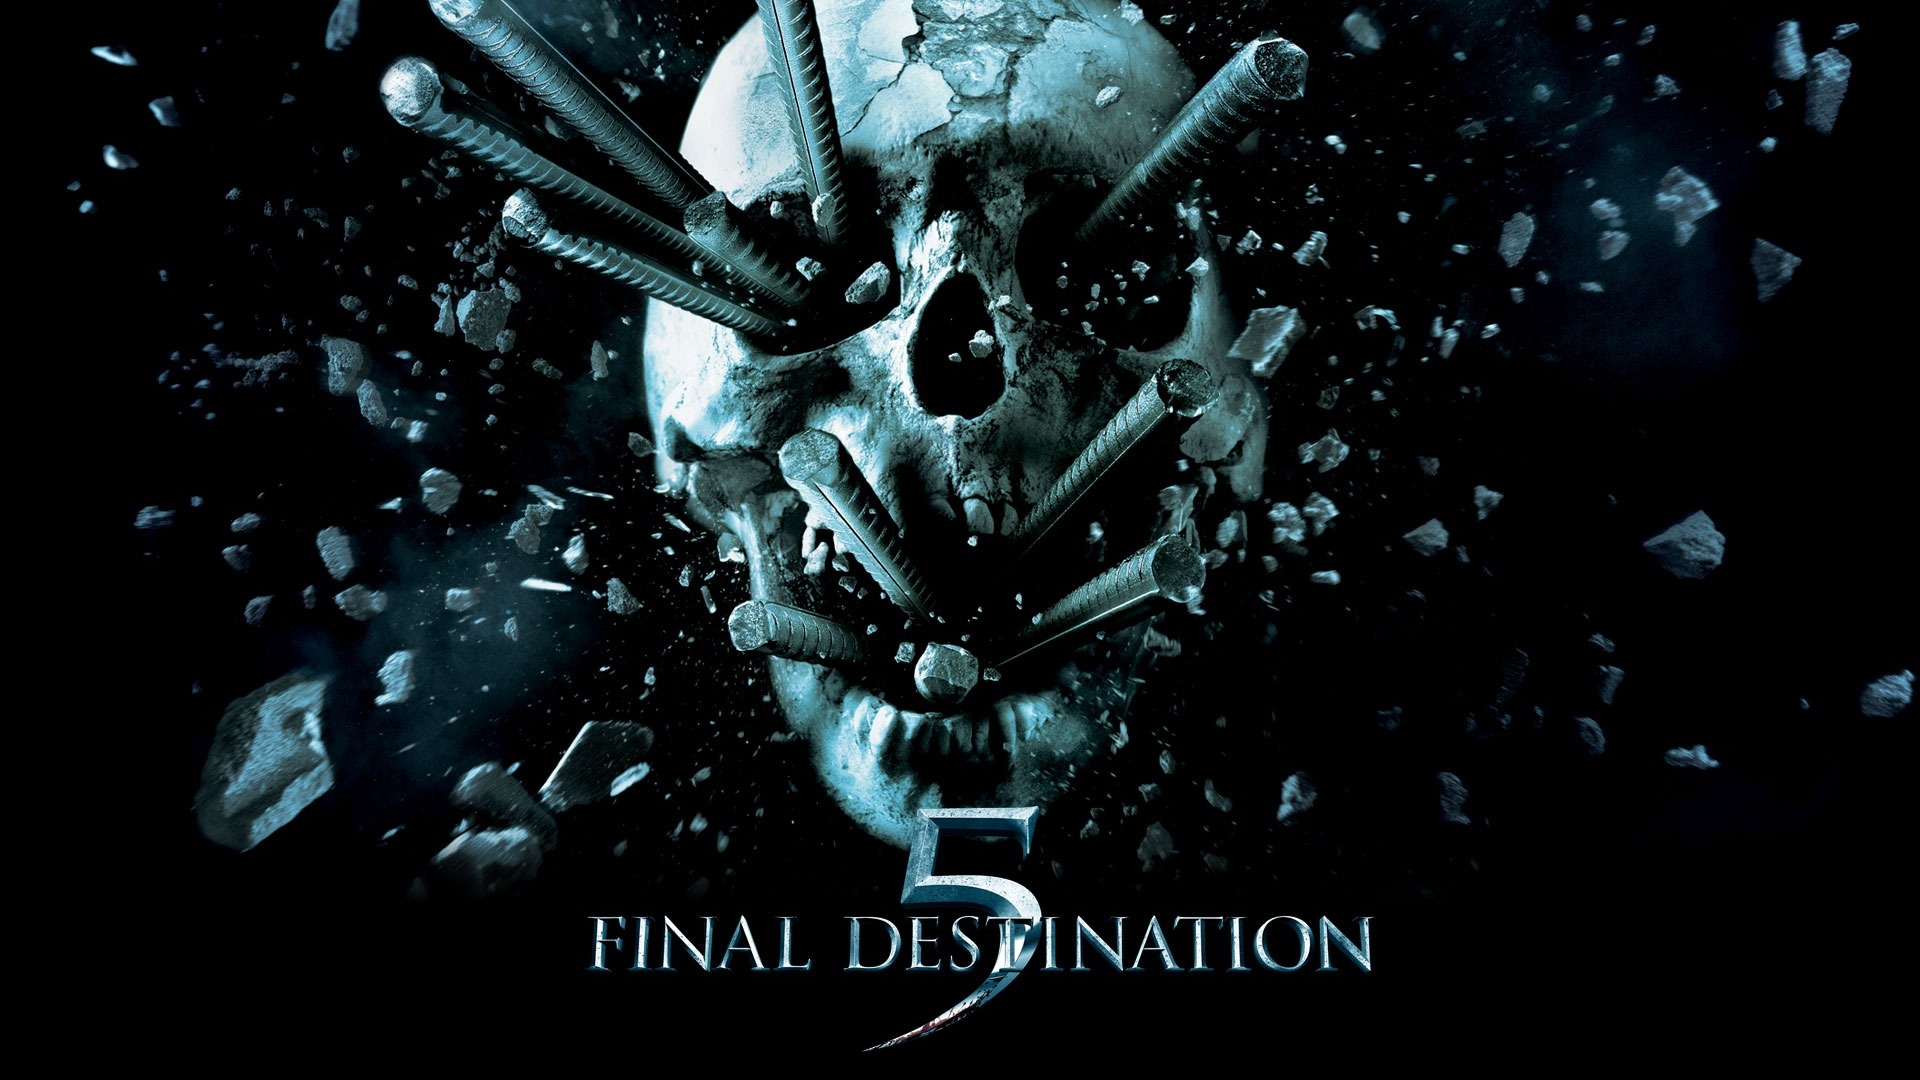 Final Destination Movie Wallpapers - HD wallpapers